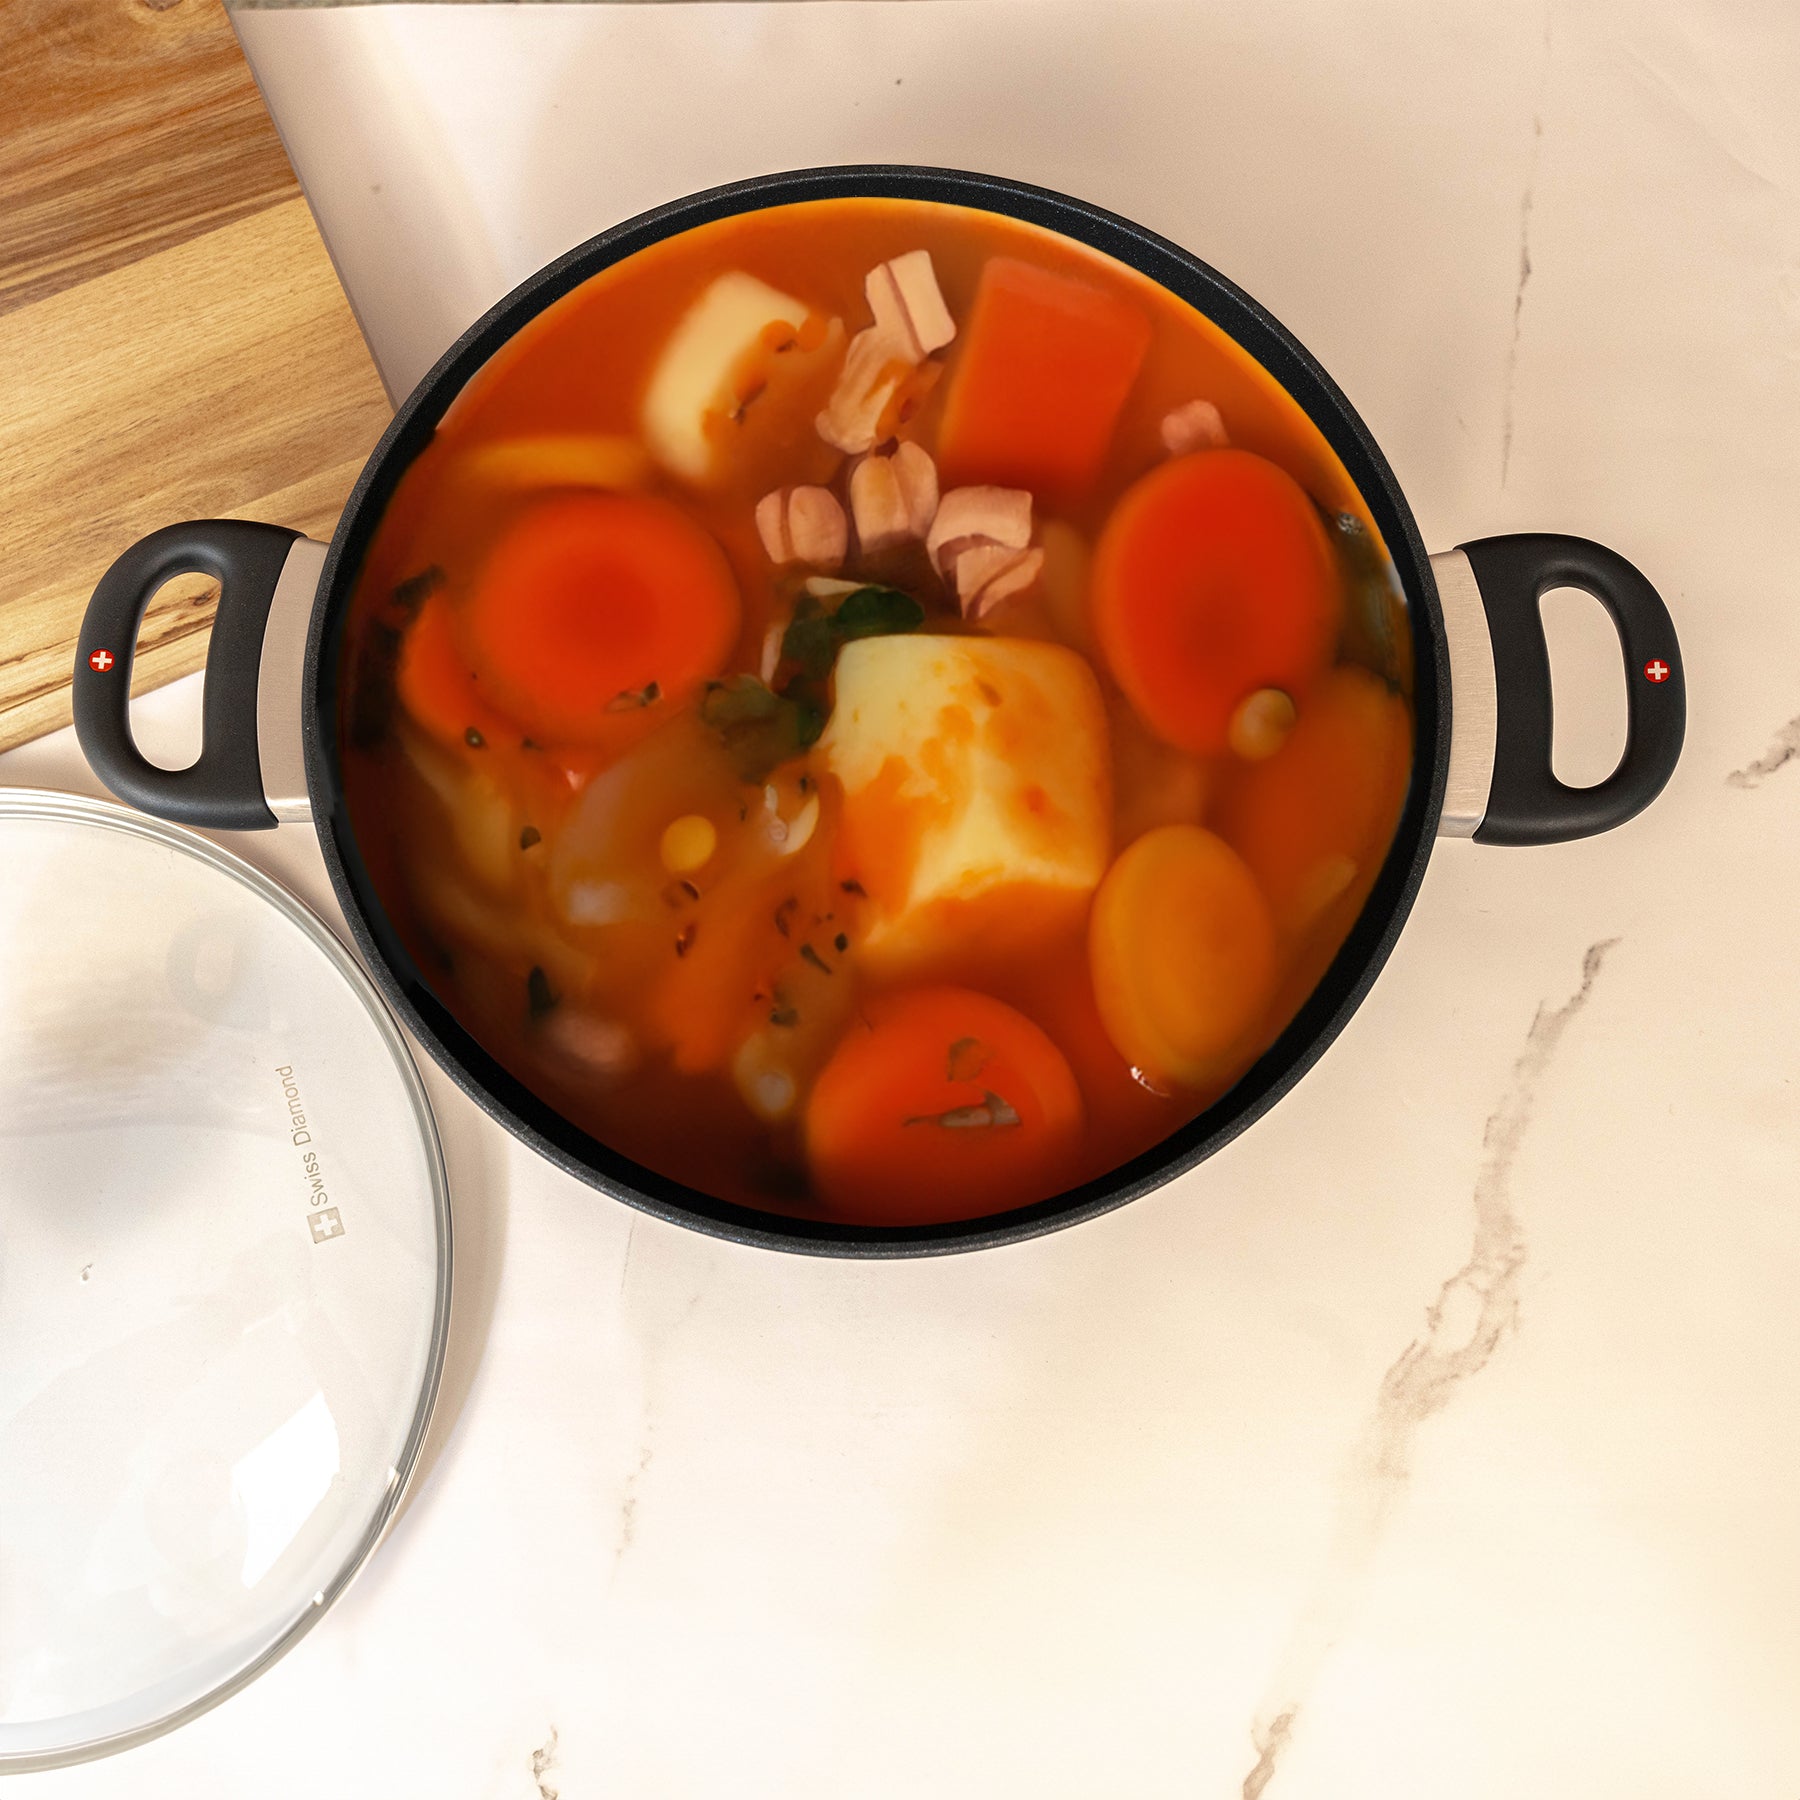 XD Nonstick Braiser with Glass Lid top view of food inside sitting on a marble kitchen counter